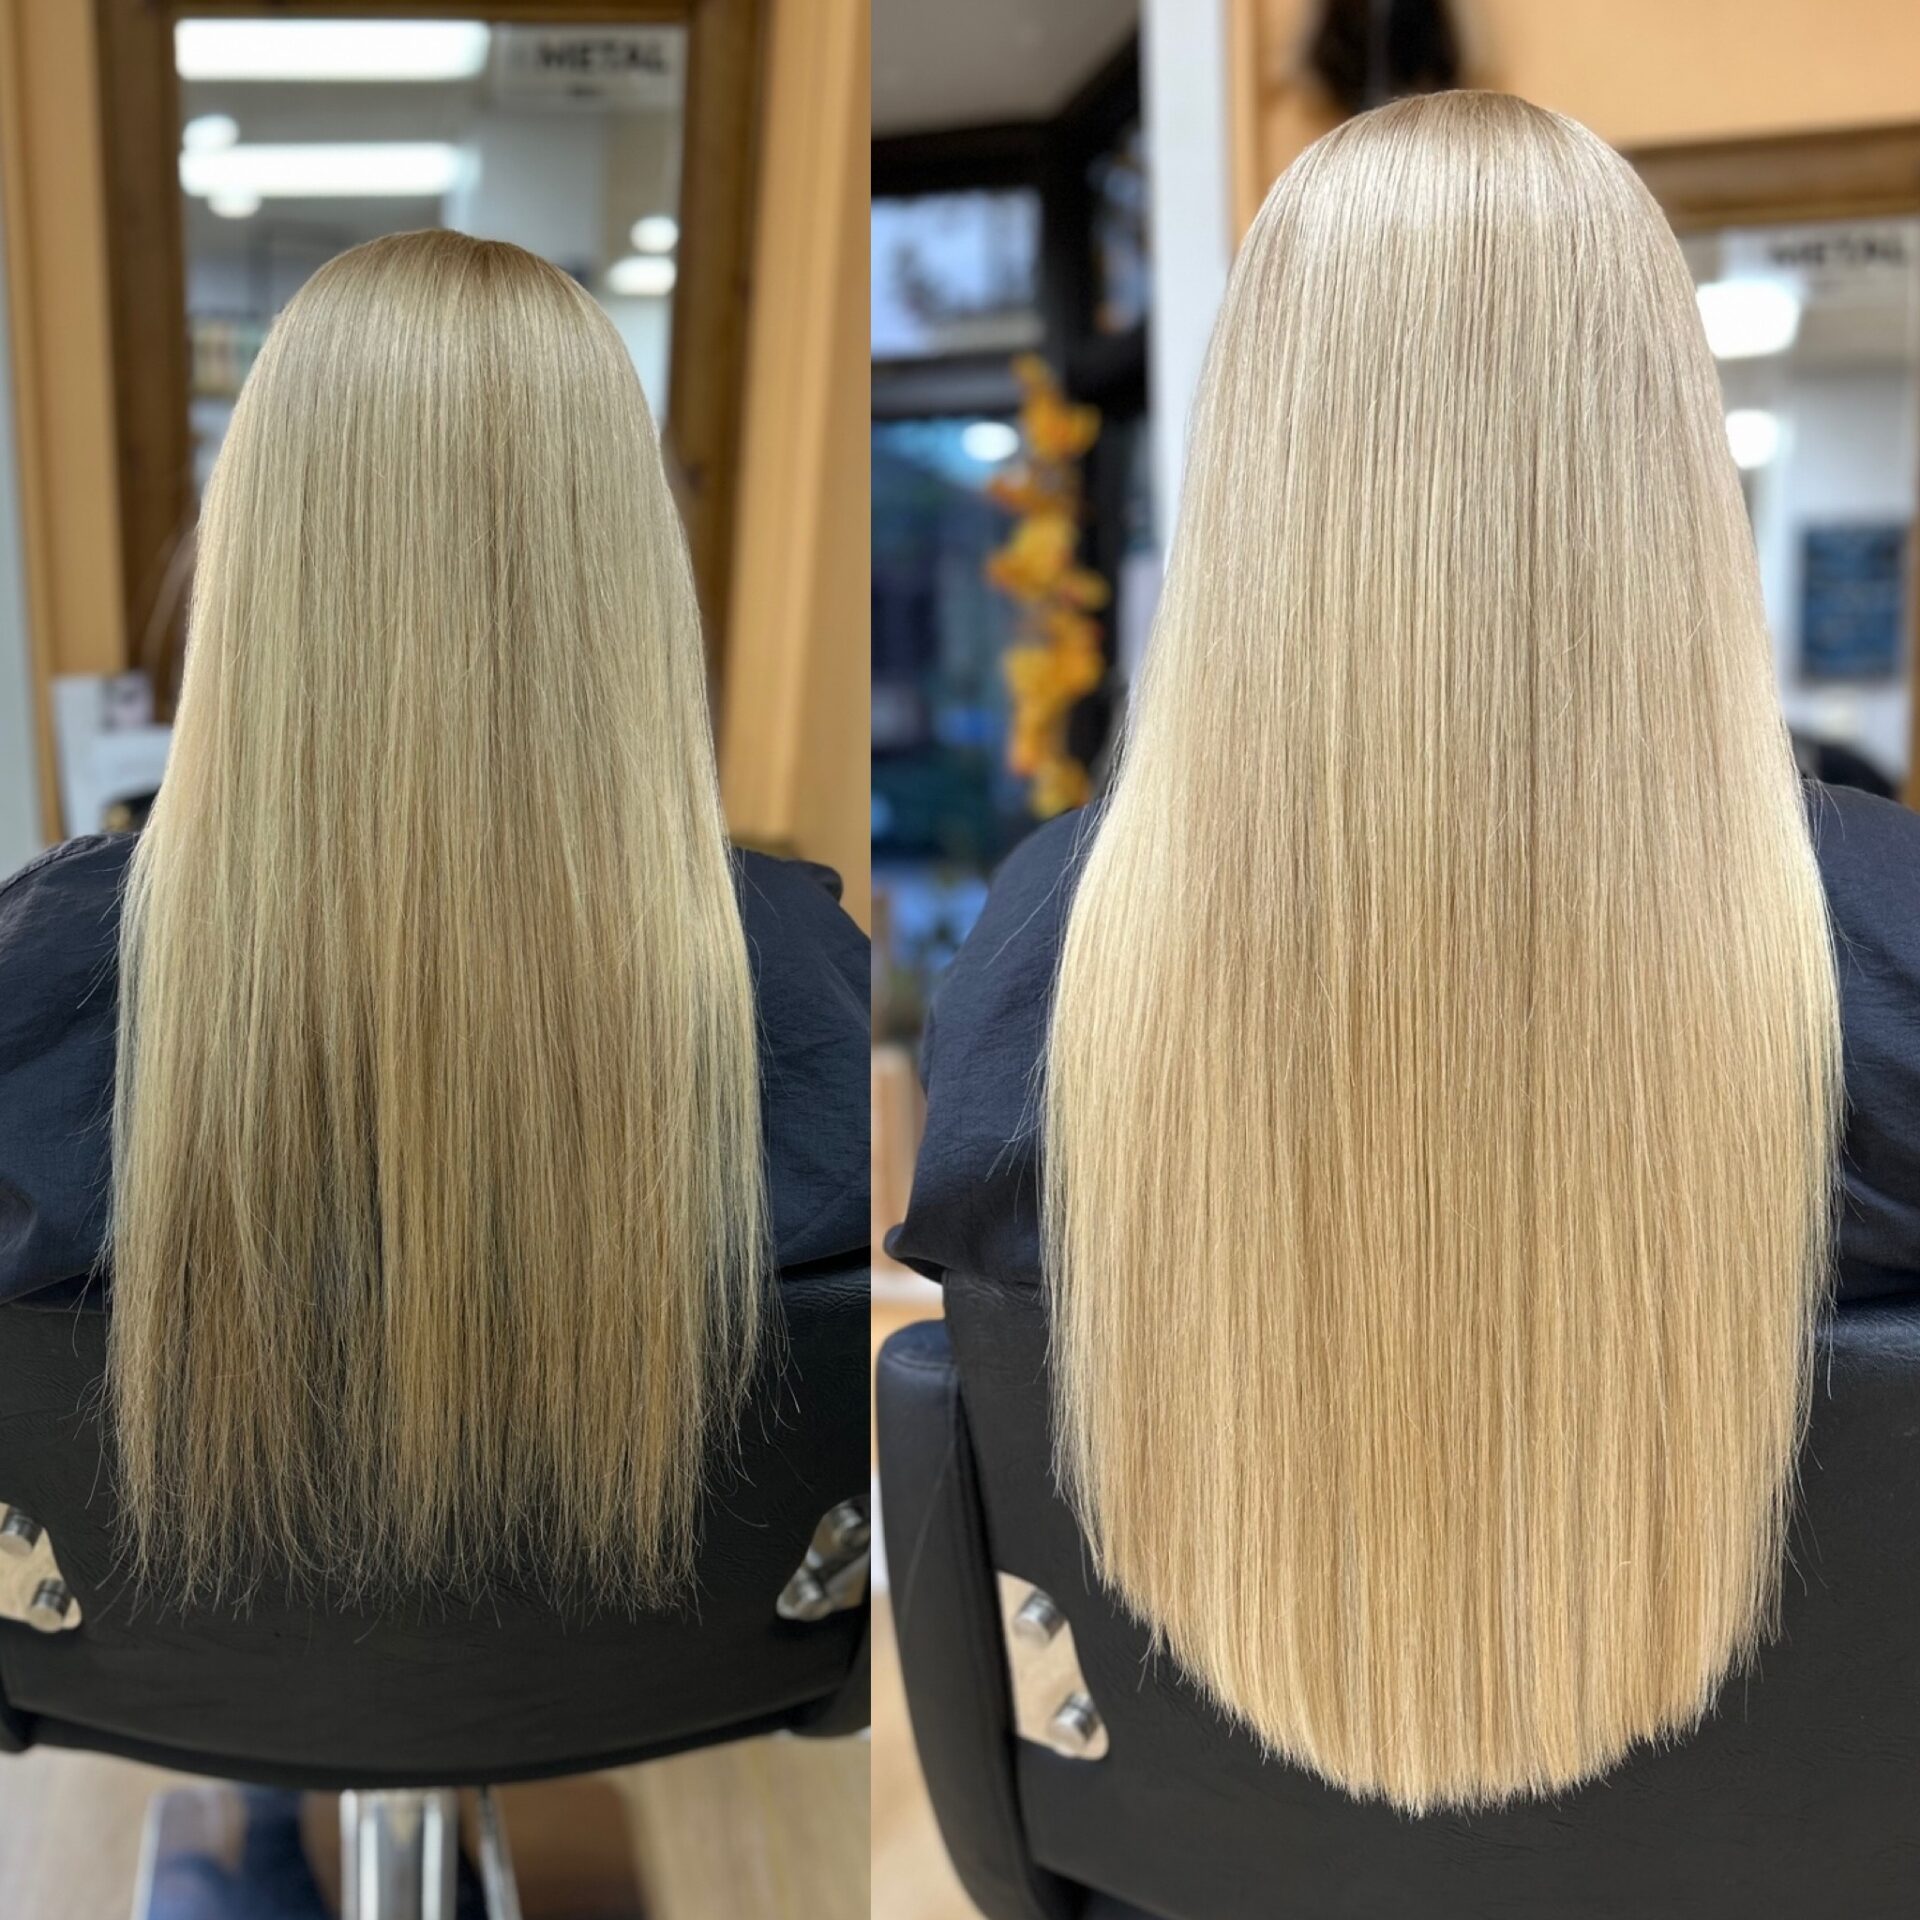 Great Lengths Platinum Awarded Hairdressers In Peterborough